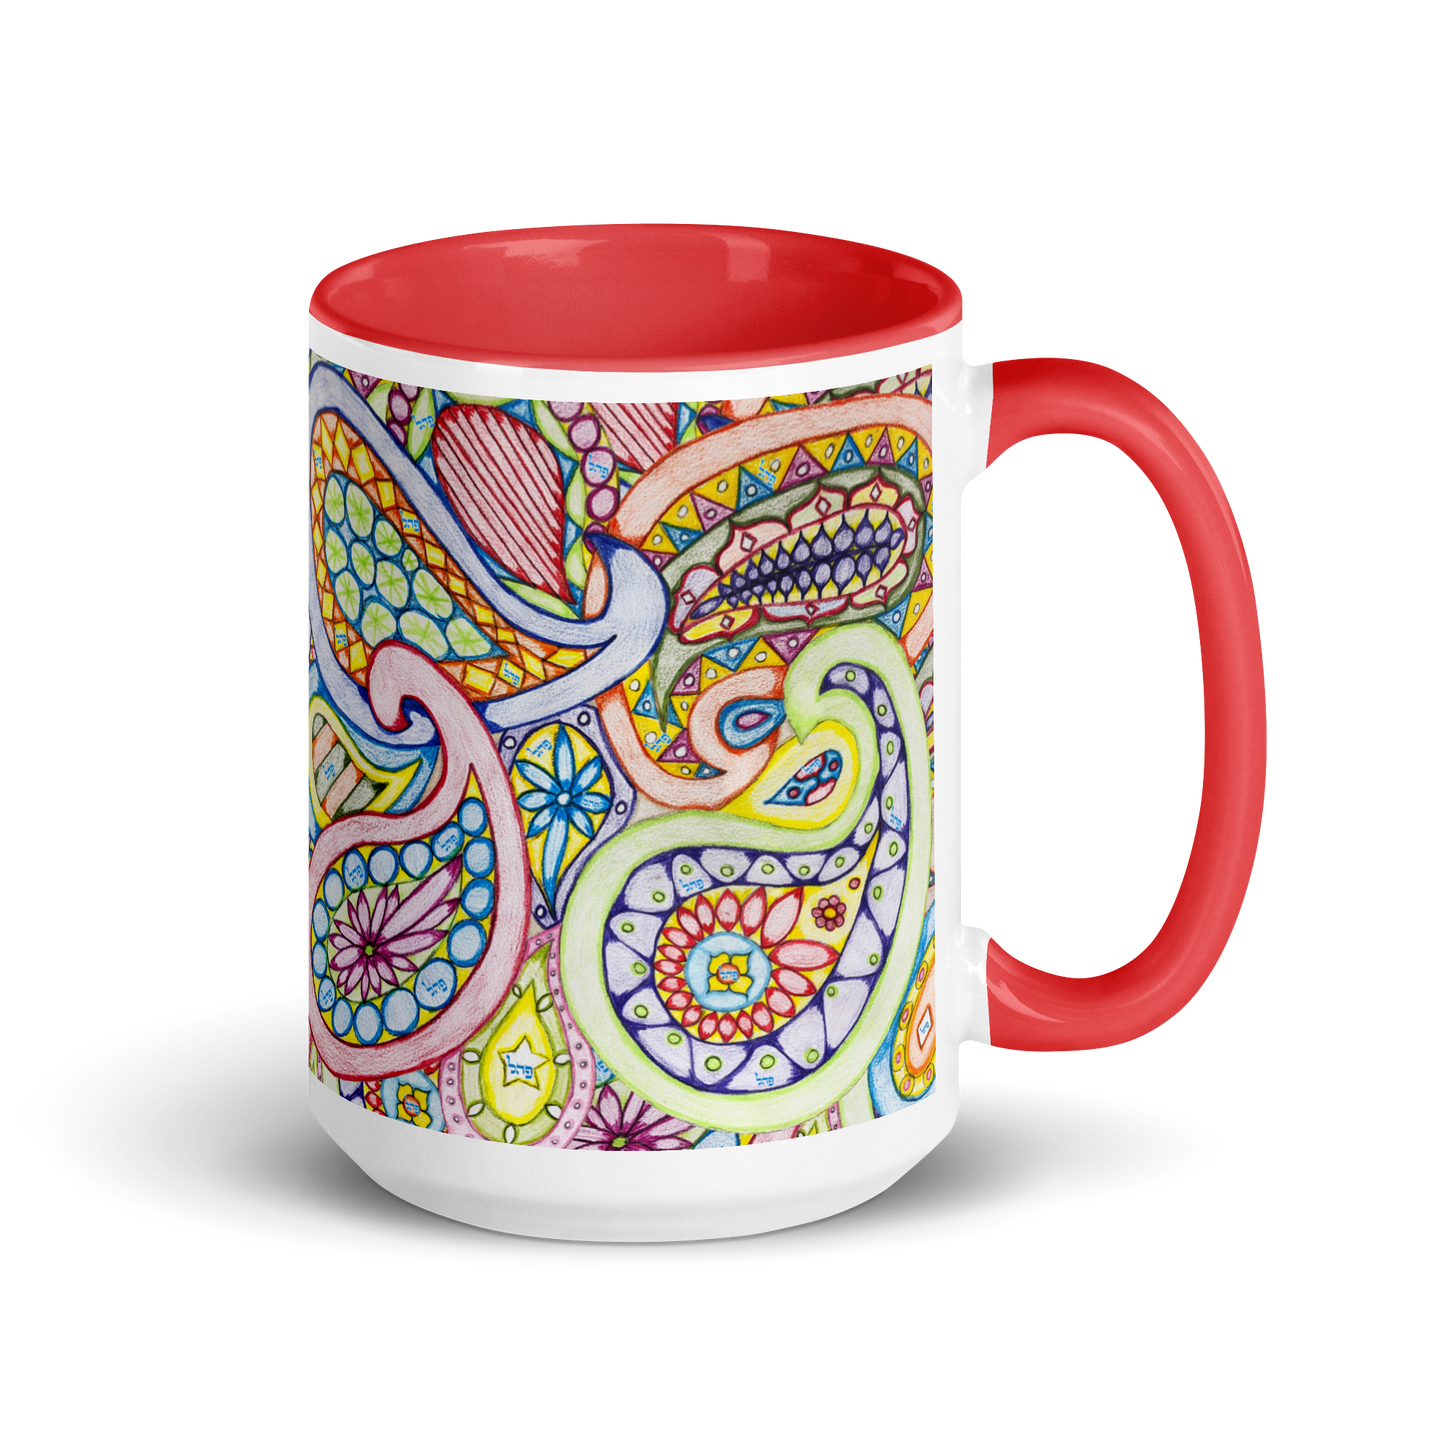  Mug-with-Color-Inside-15oz-Red-Remove-Addictions-(72-Names-of-God-Pey-Hey-Lamed)-4-137online.com